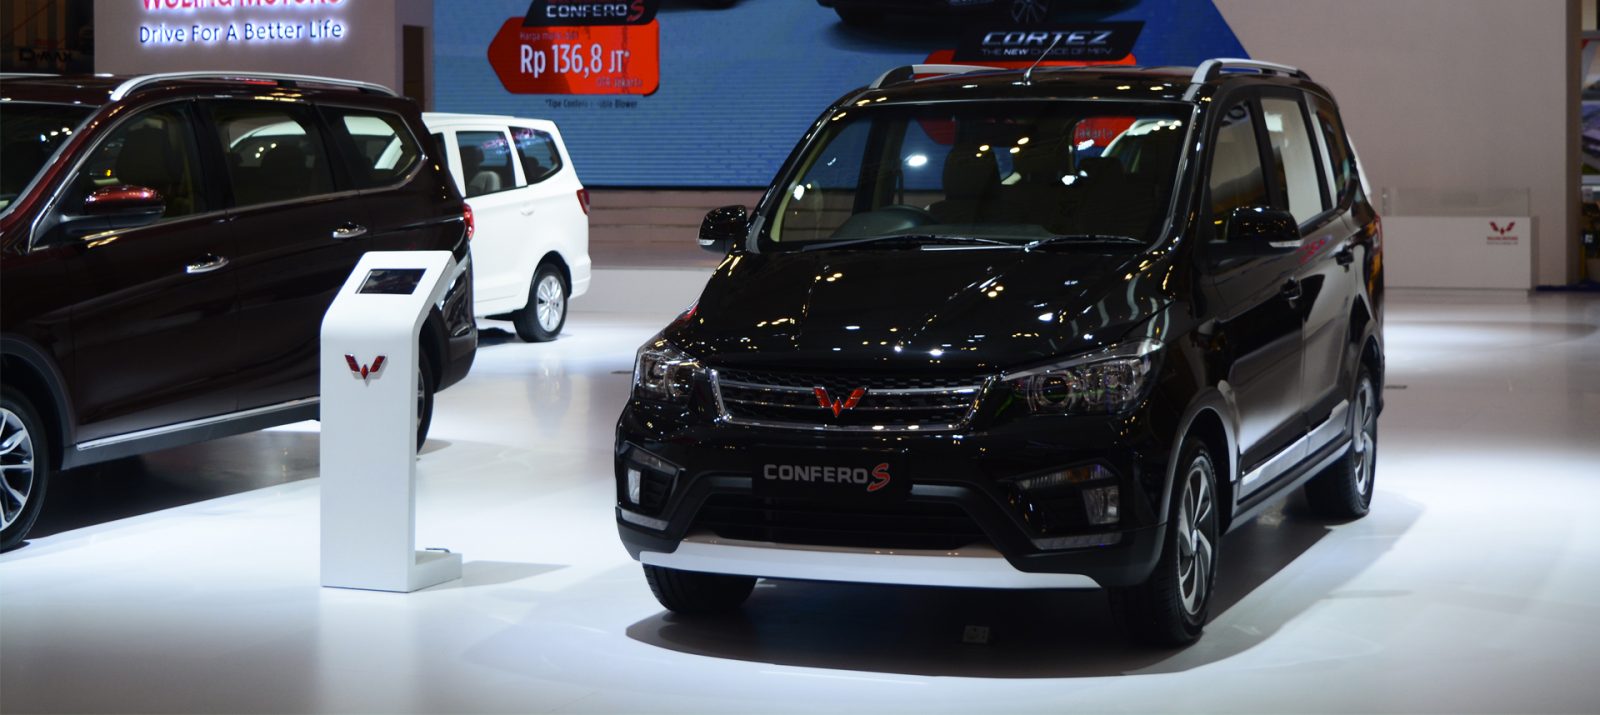 Image Your Wuling Guide to Explore Automotive Shows